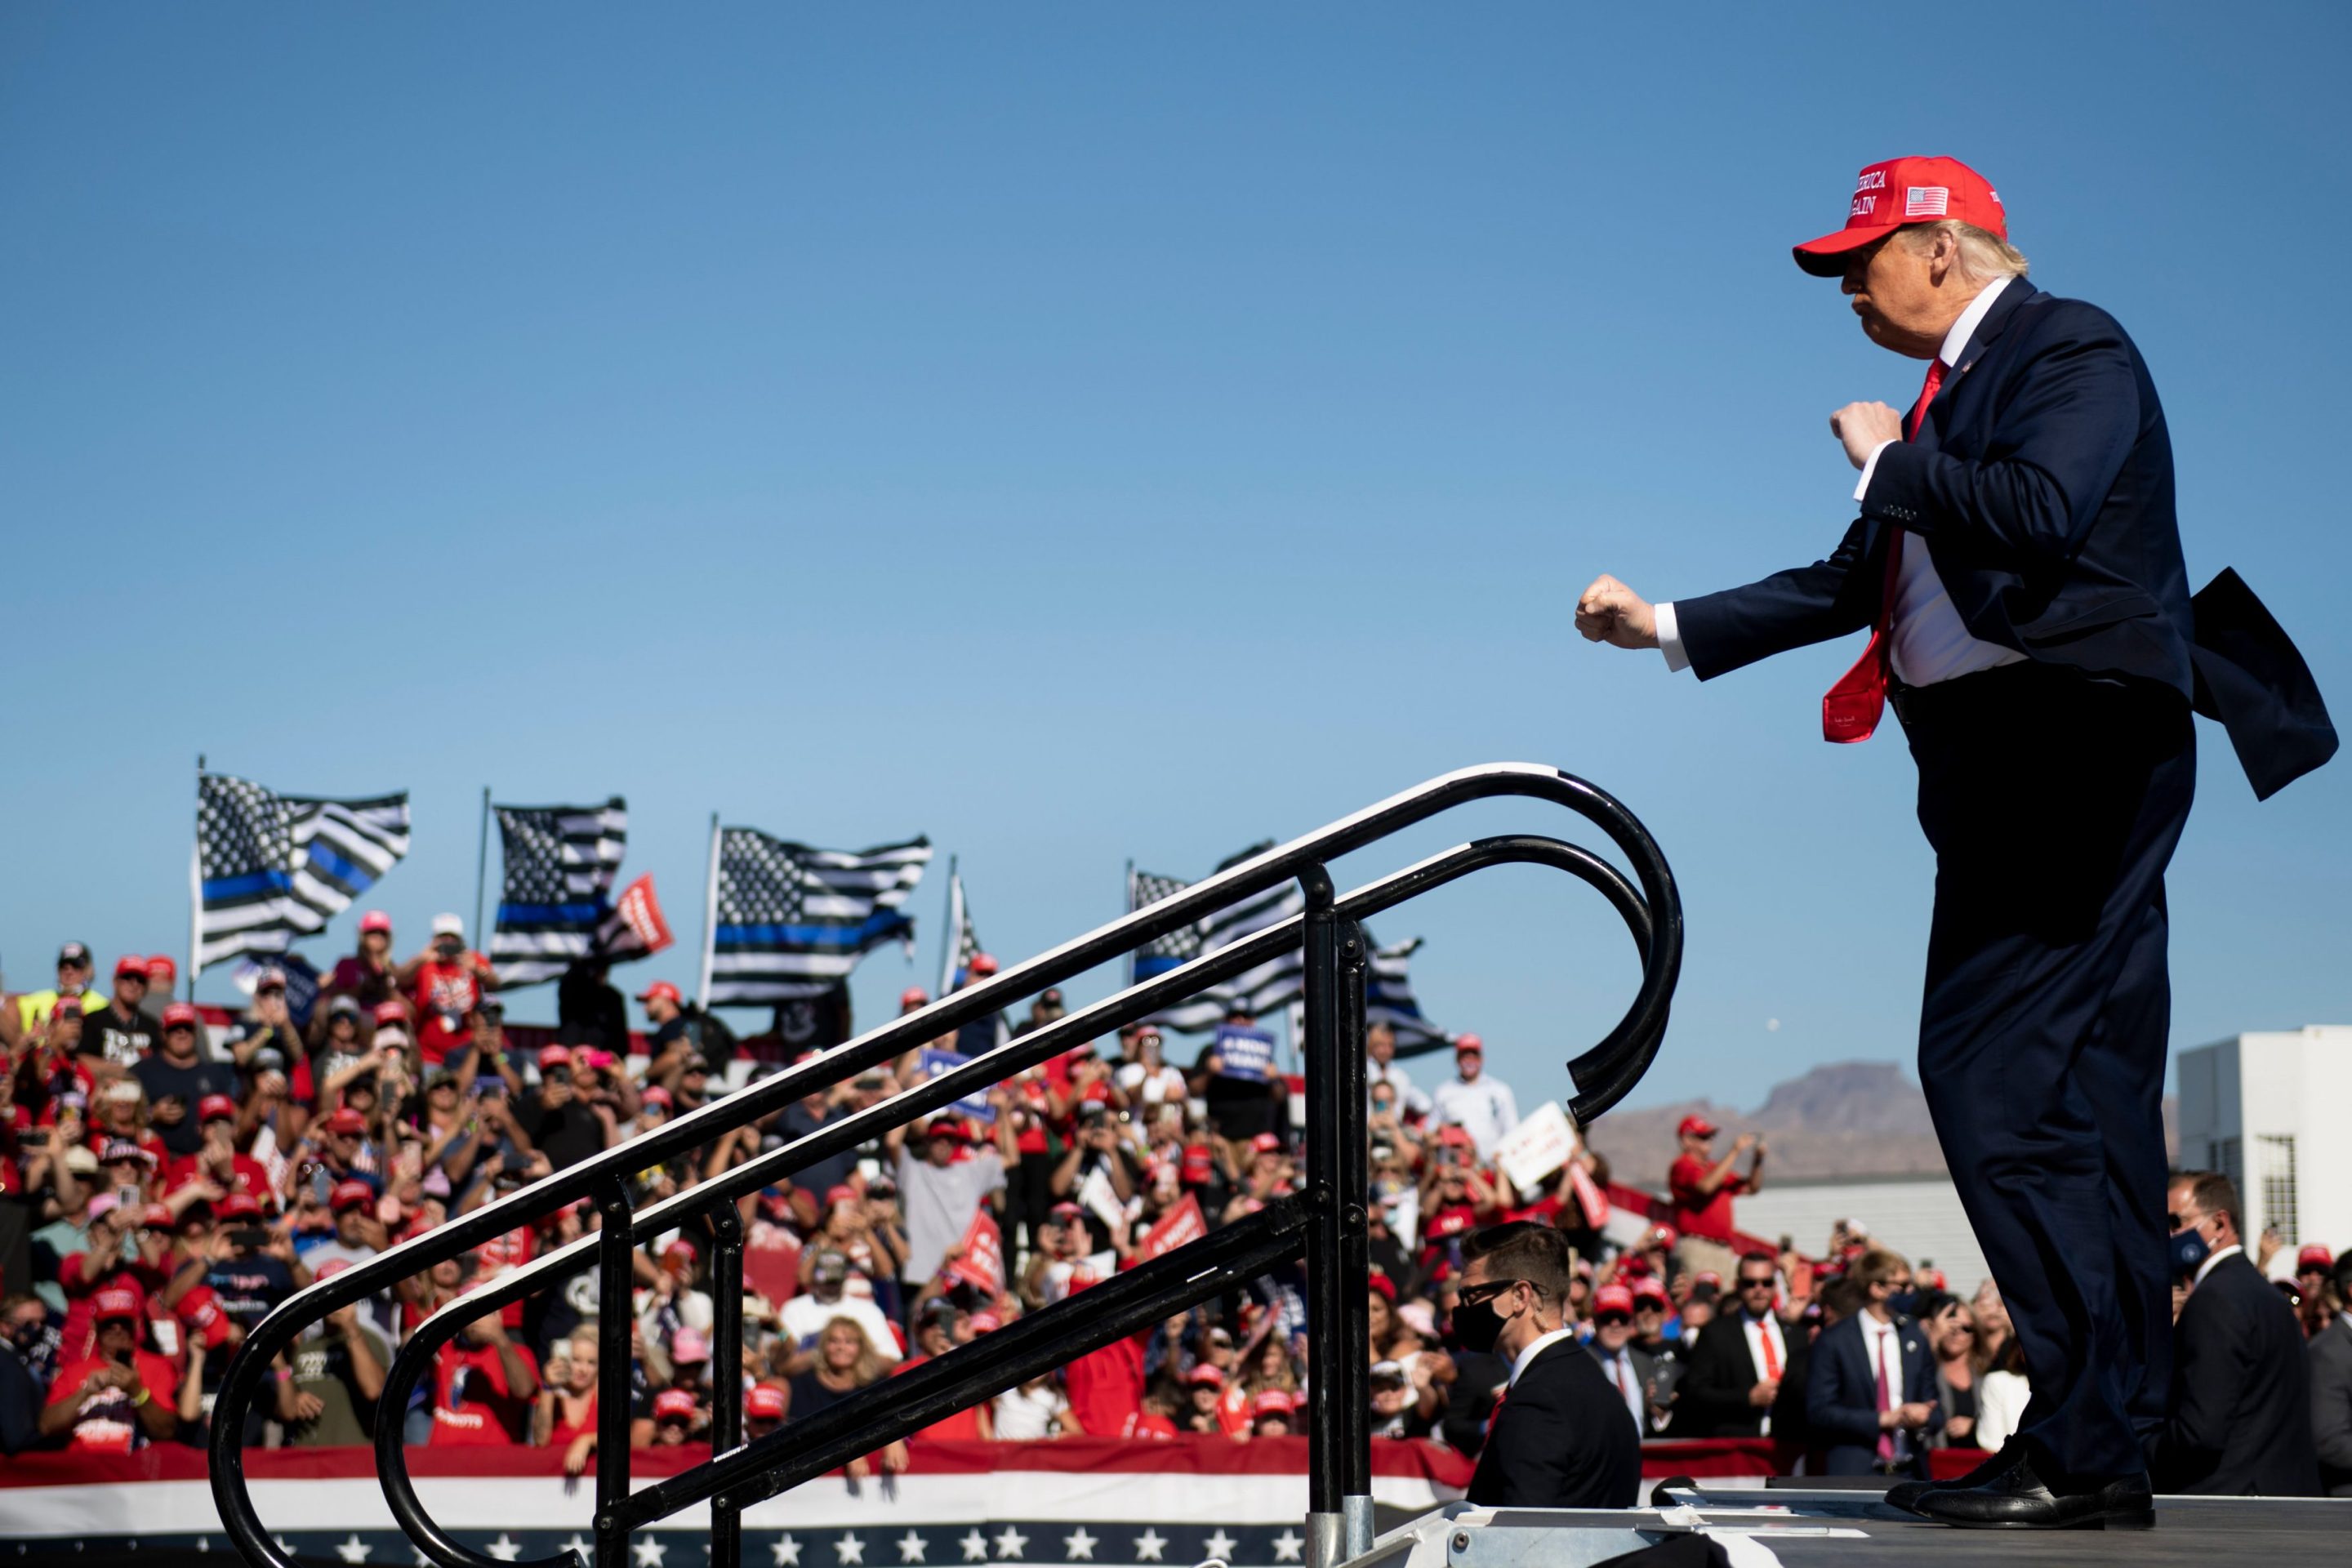 US President Donald Trump dances as he leaves after speaking during a Make America Great Again rally